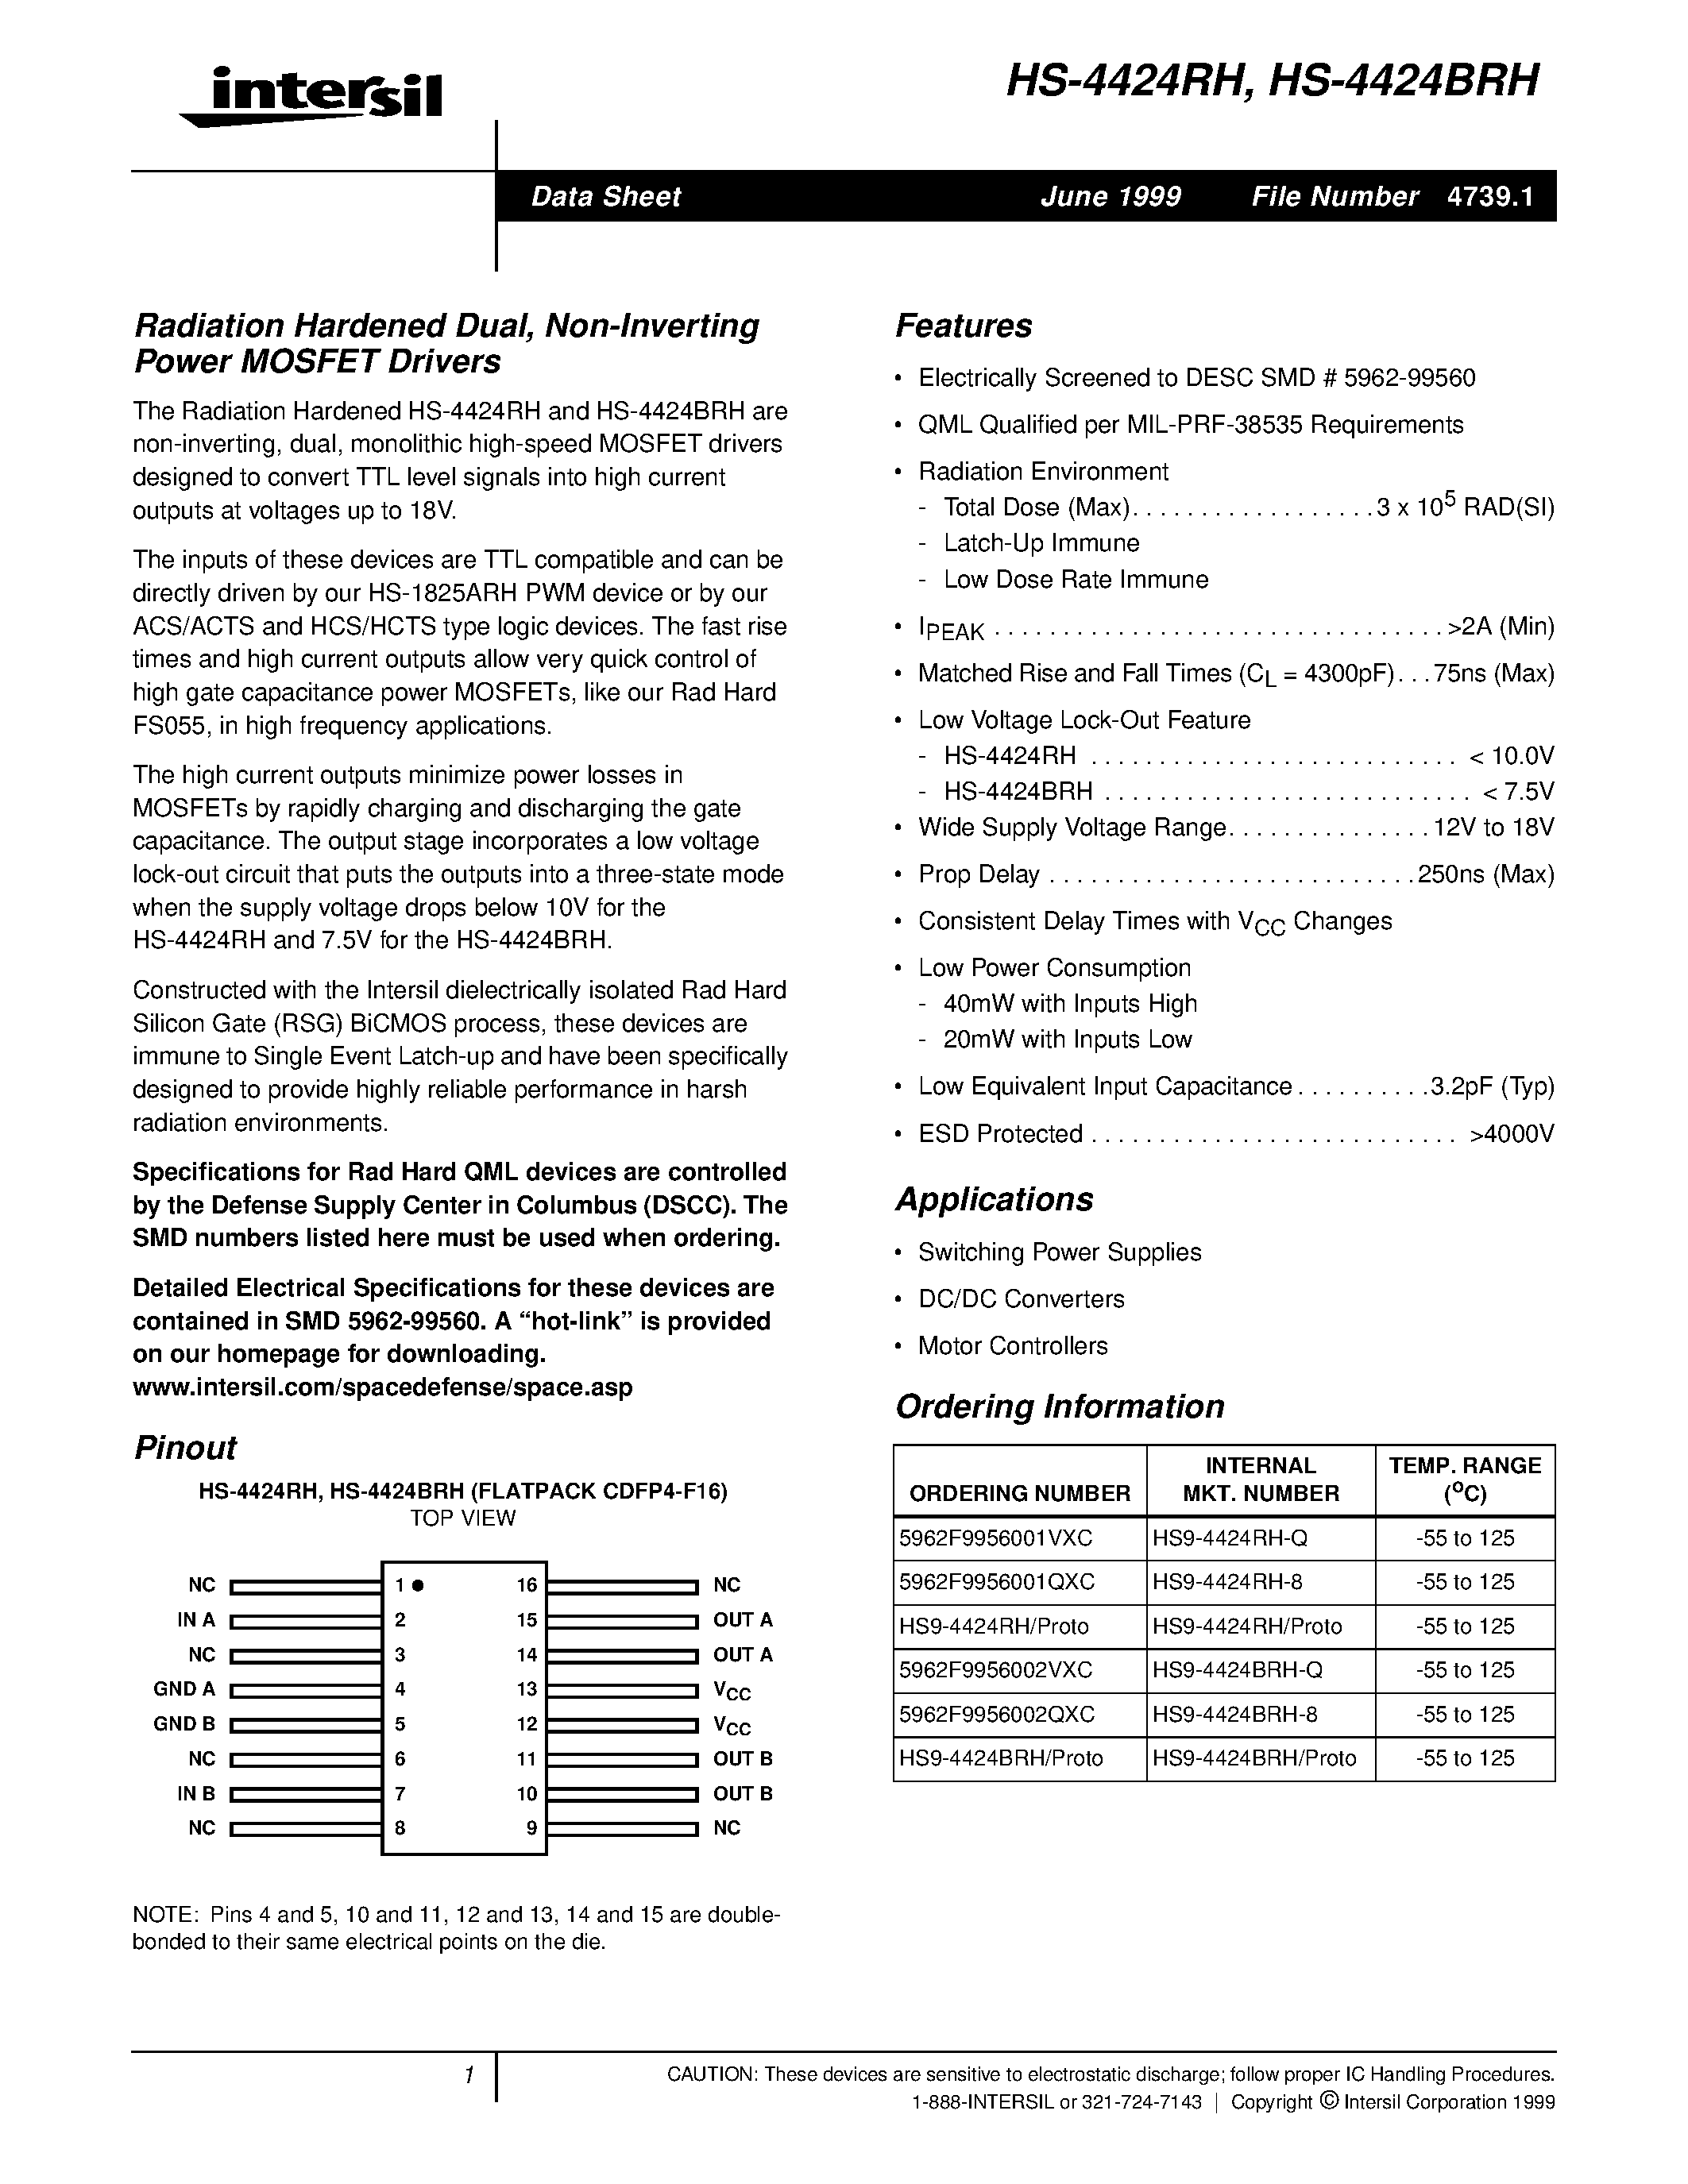 Datasheet HS9-4424BRH-Q - Radiation Hardened Dual/ Non-Inverting Power MOSFET Drivers page 1